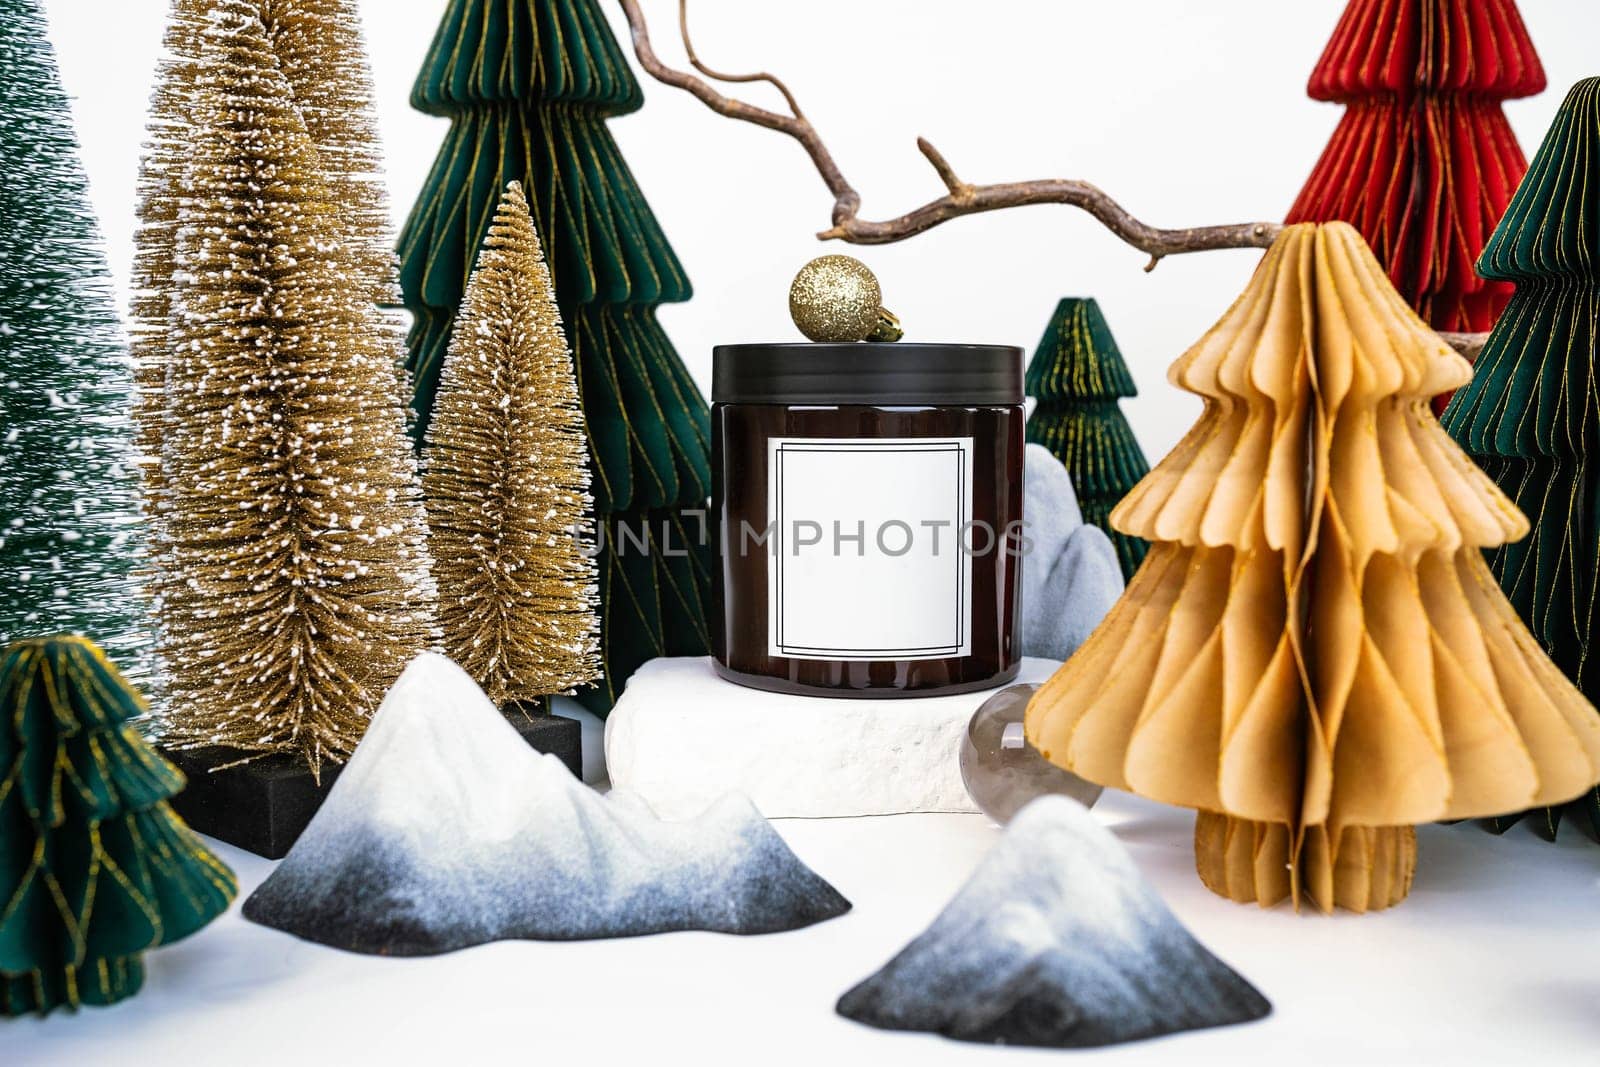 dark jar with lid on the background of Christmas decorations, side view by tewolf